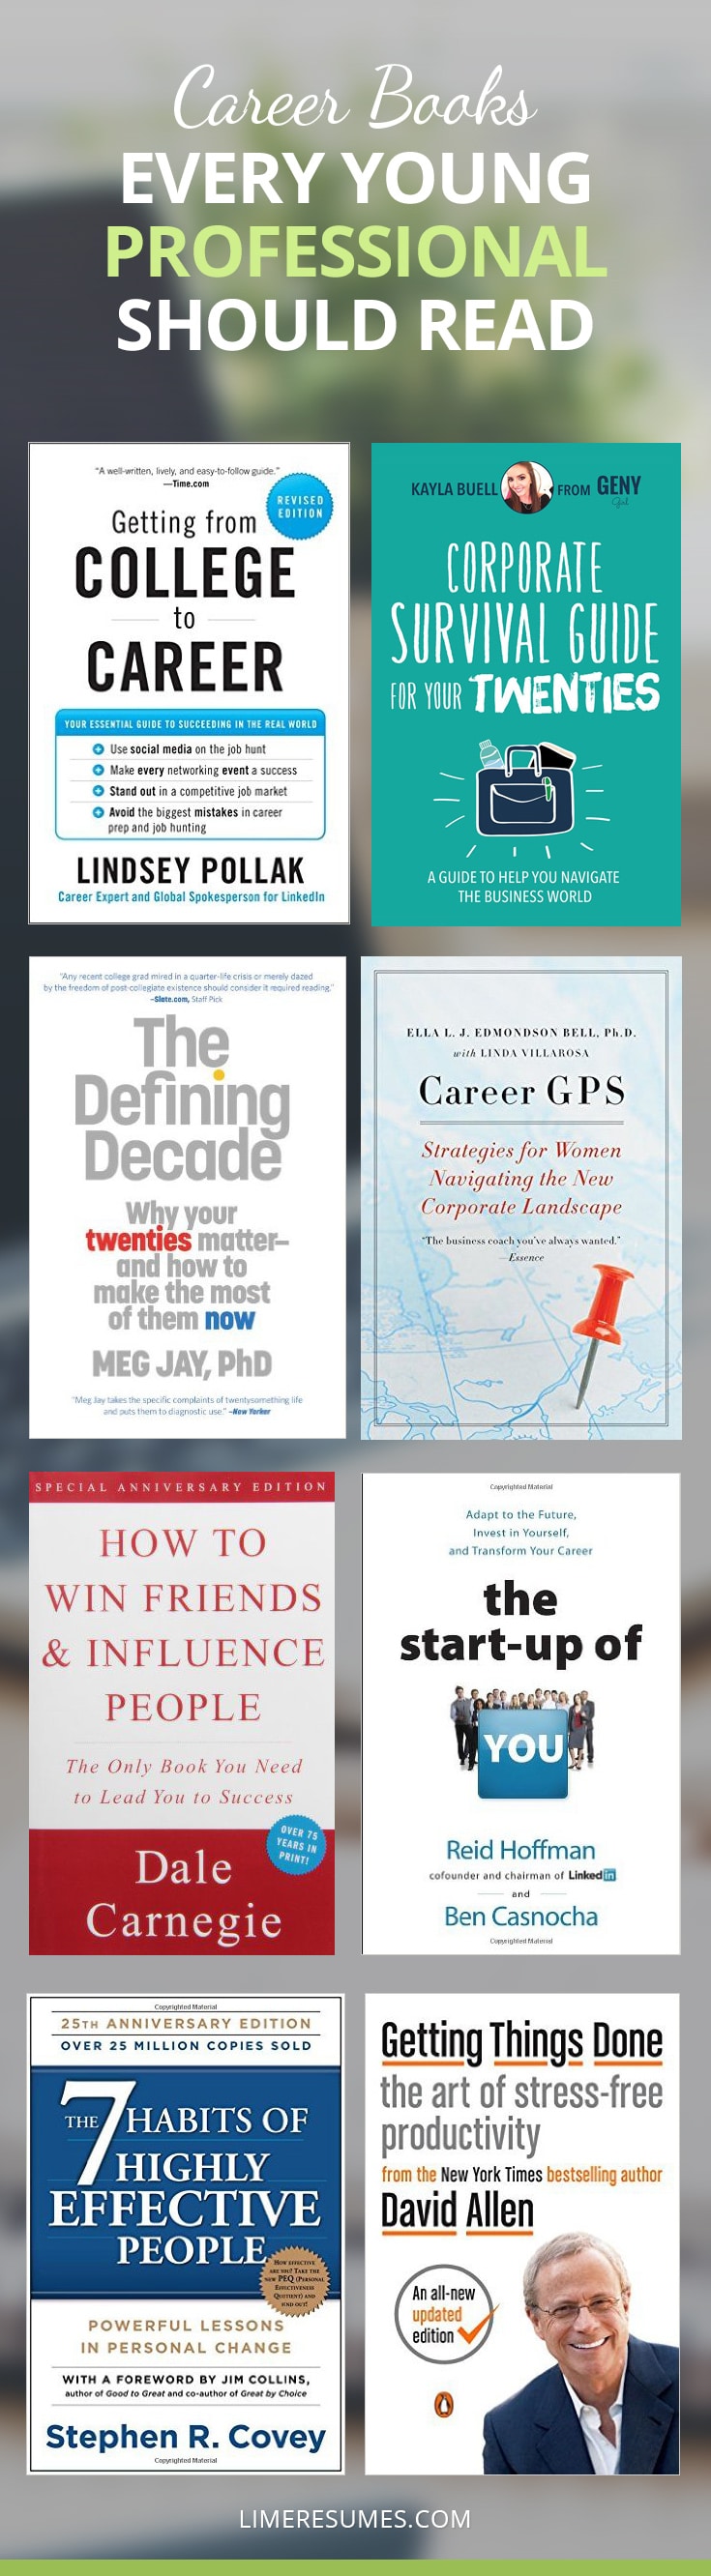 Career Books That Every Young Professional Should Read